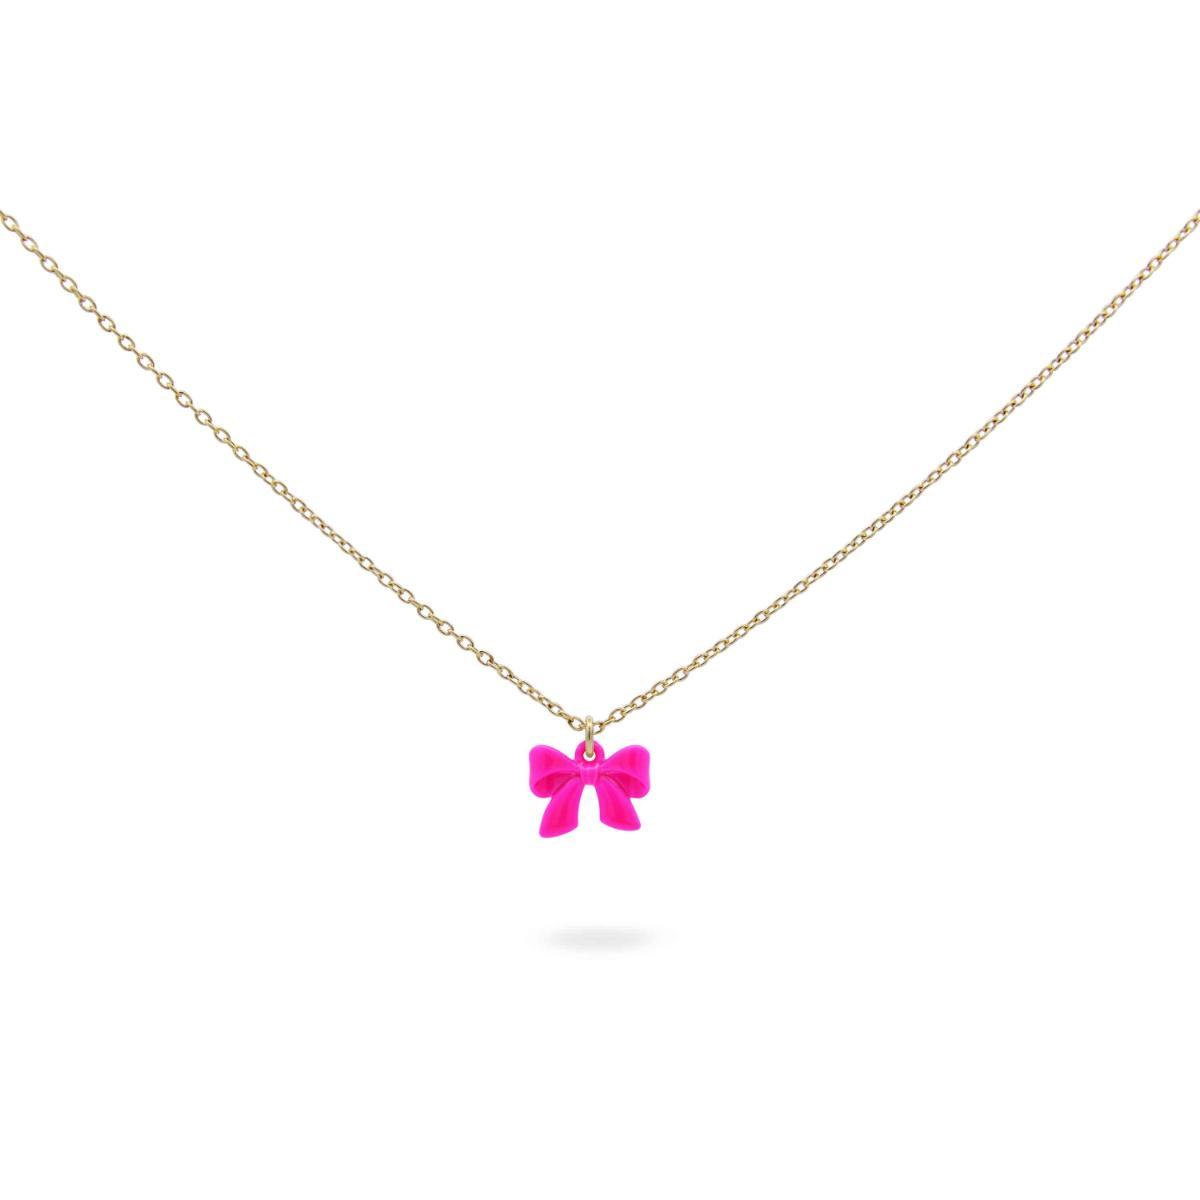 Chokers - Necklace chic bow neon pink - CANDY BOW - 1 | Rue des Mille